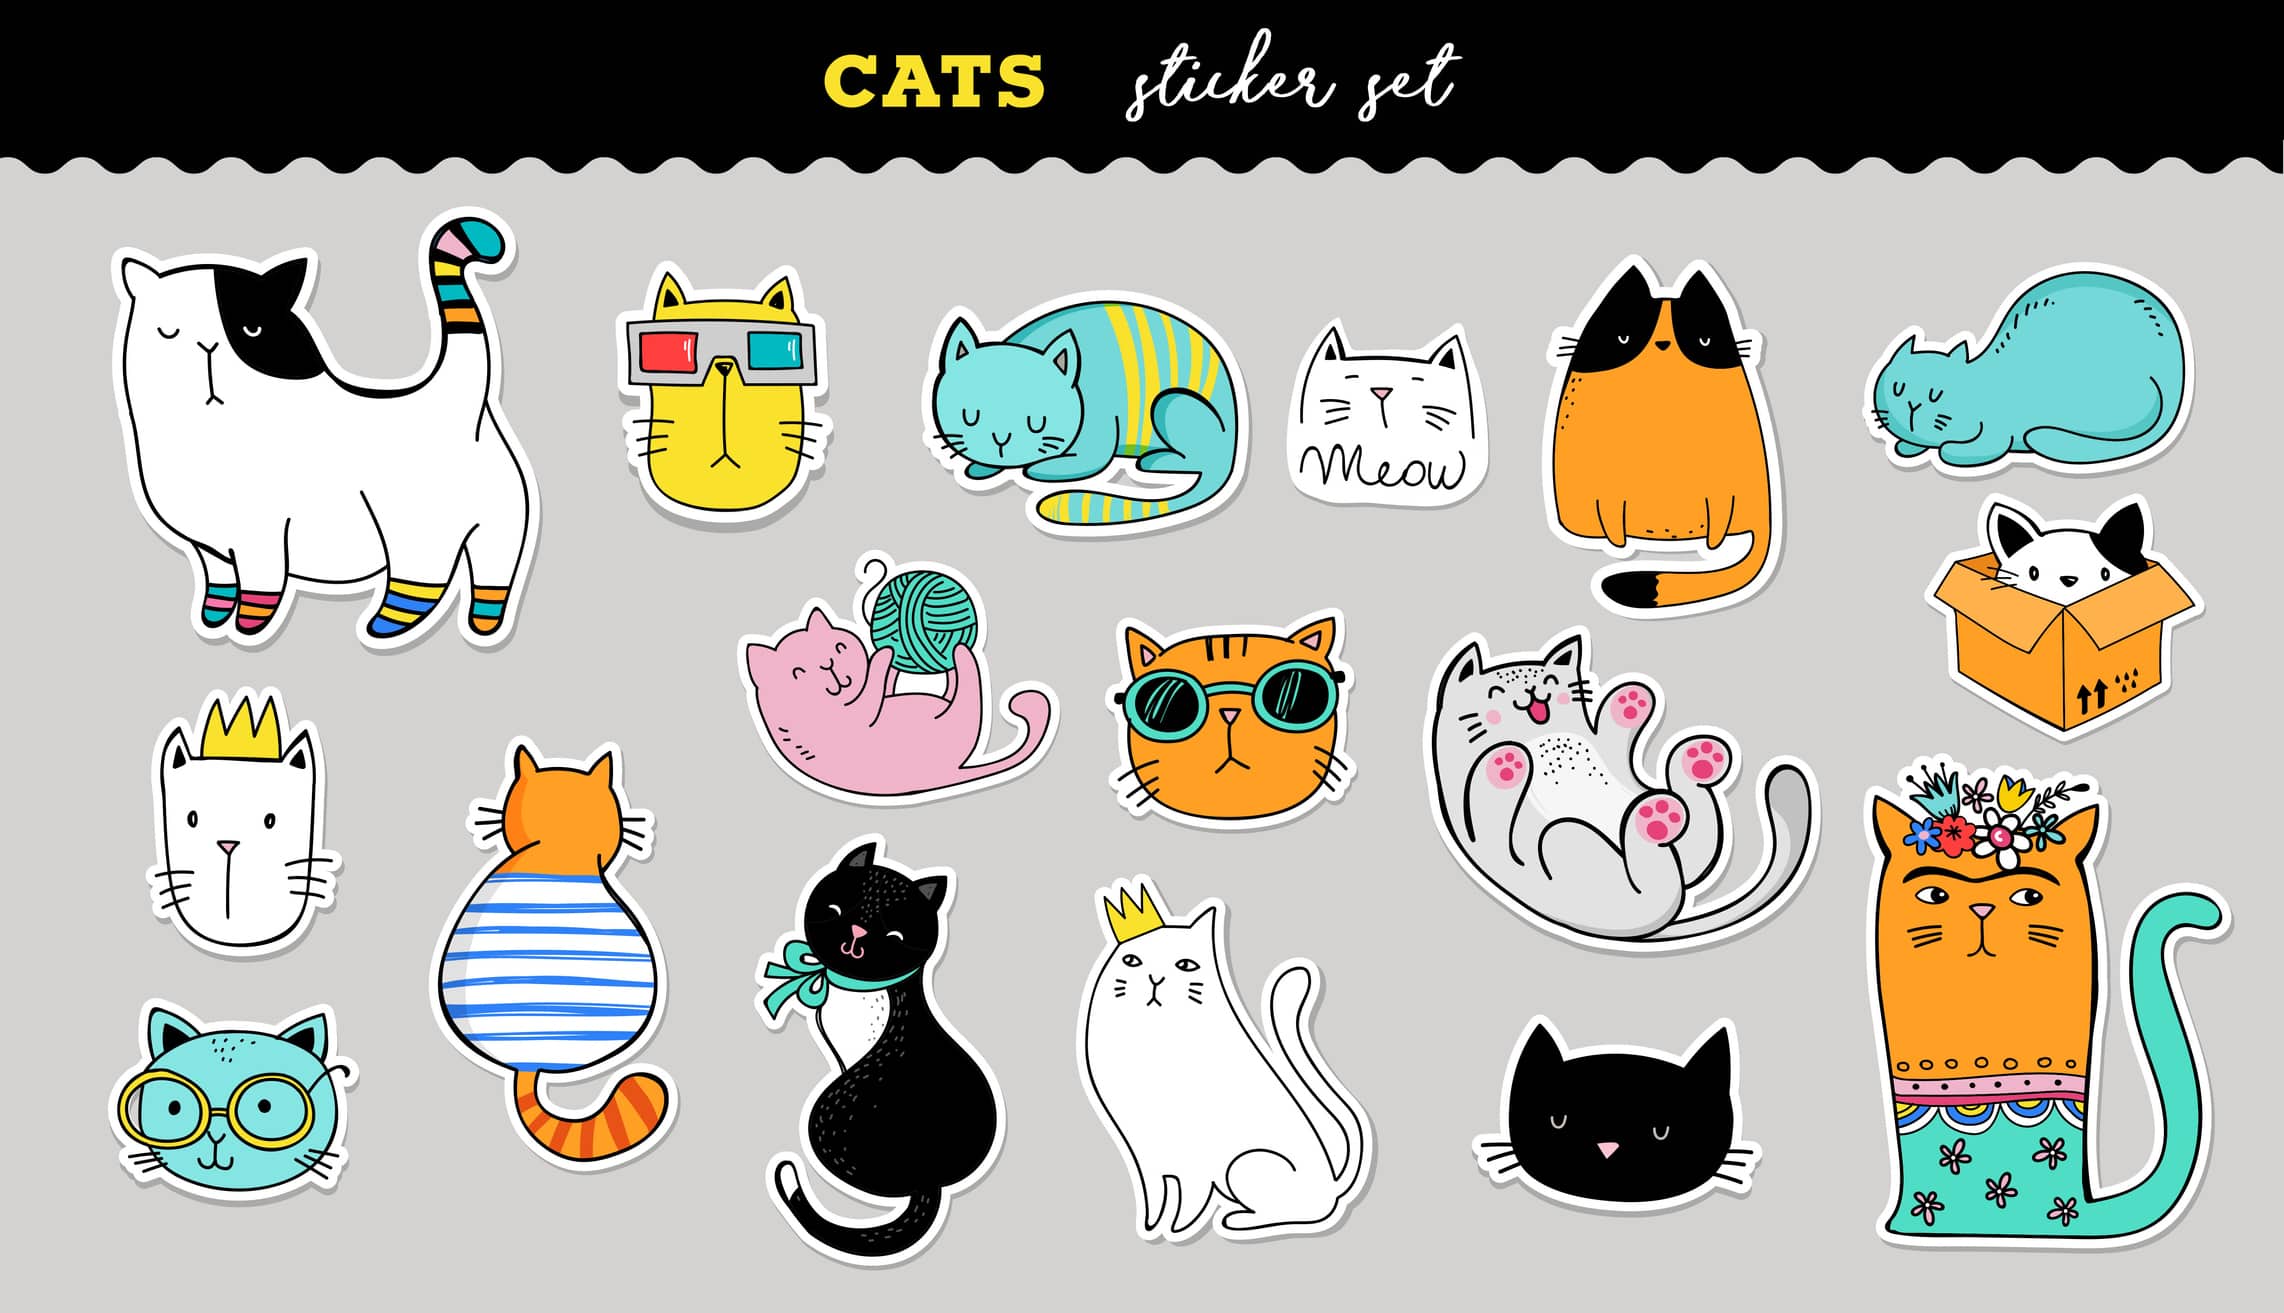 Cats cute sticker collection. Vector hand drawn illustrations